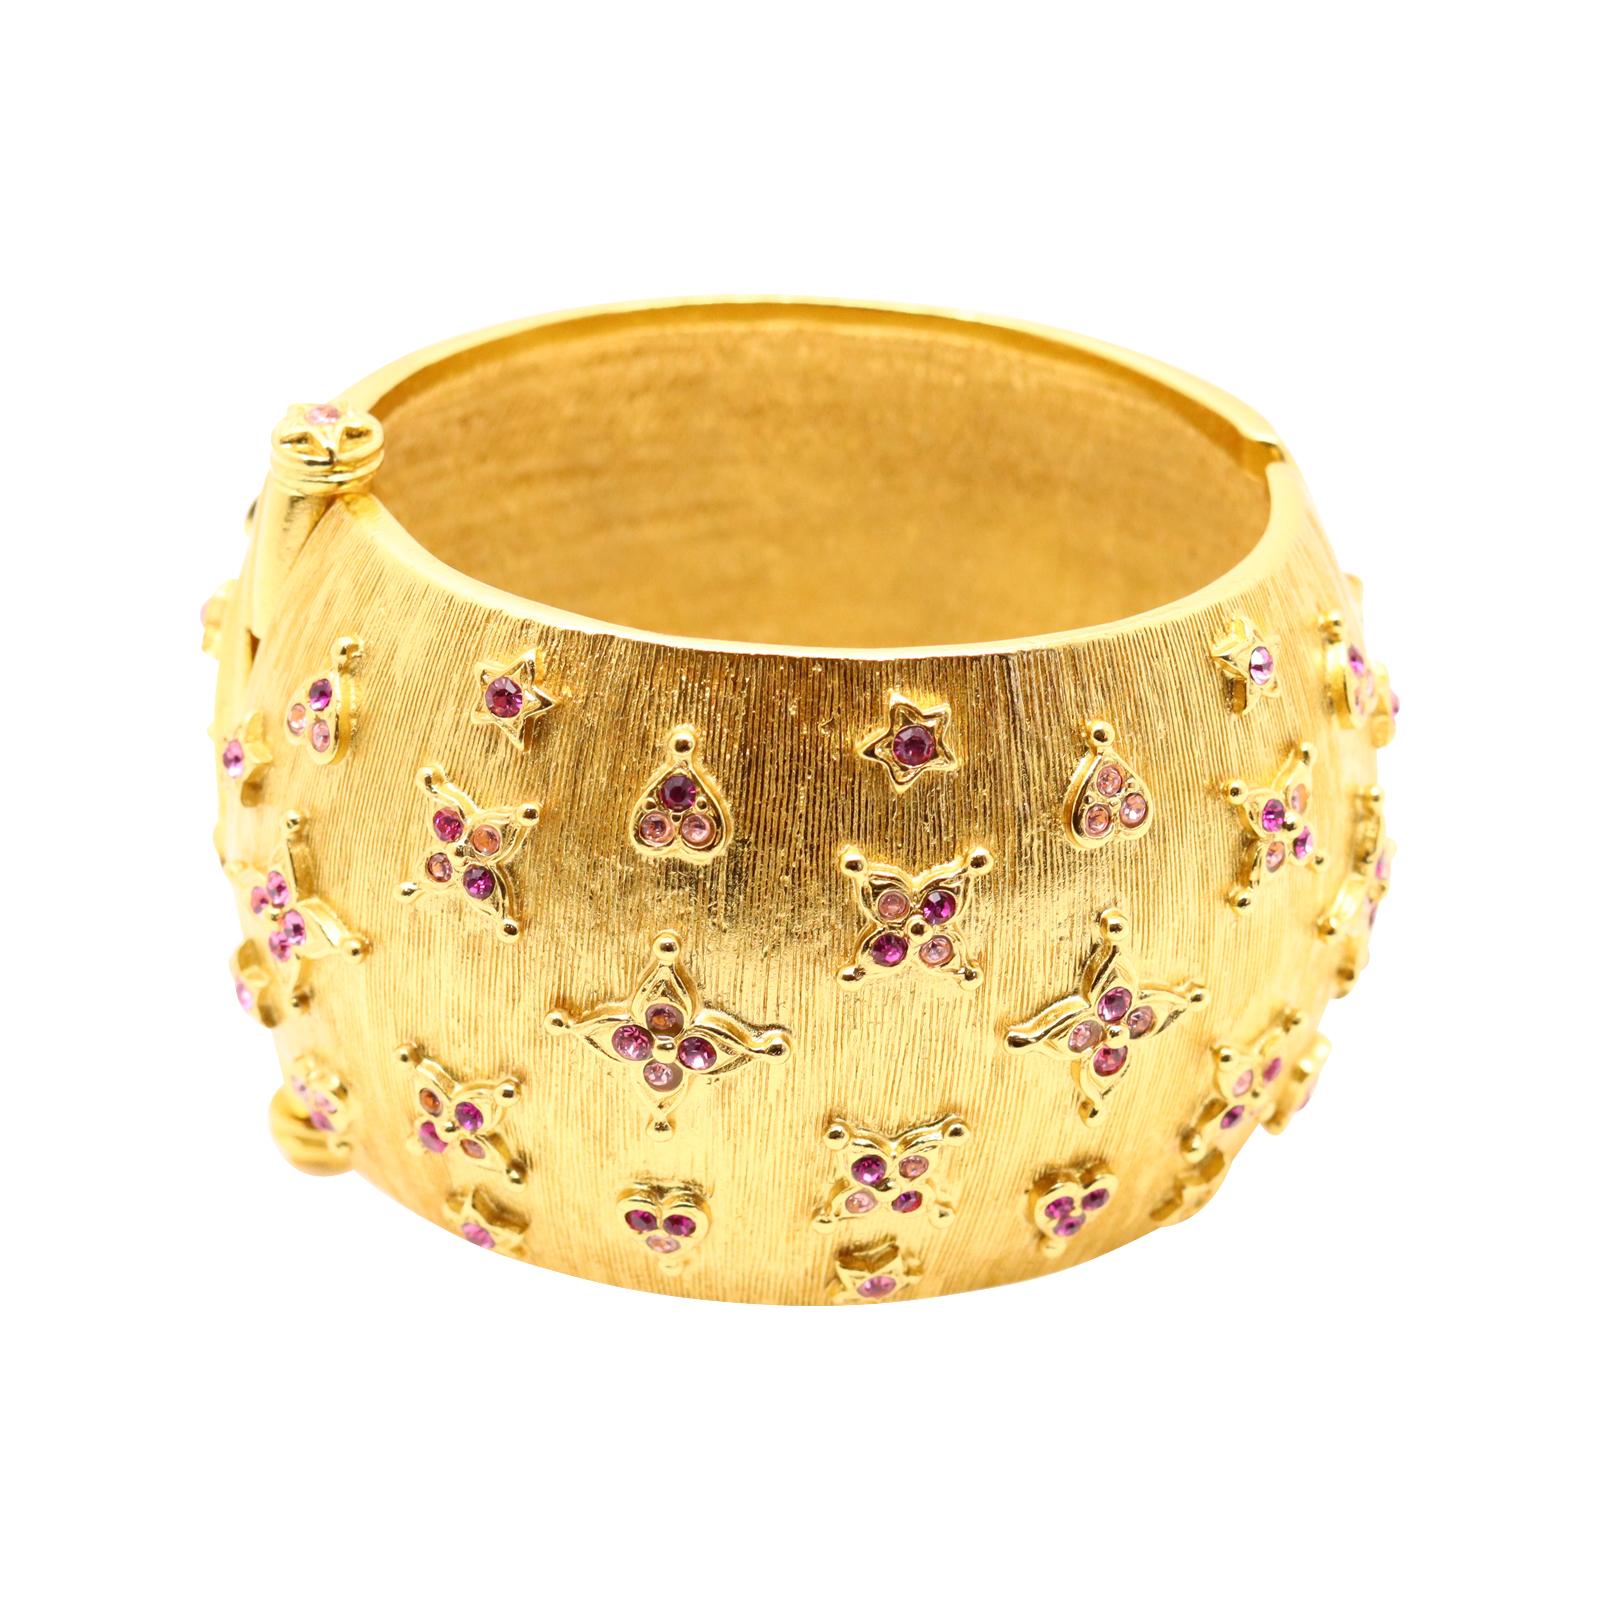 Vintage Maison Goossens for YSL Gold Bracelet with Pink Crystals Circa 1980s In Good Condition For Sale In New York, NY